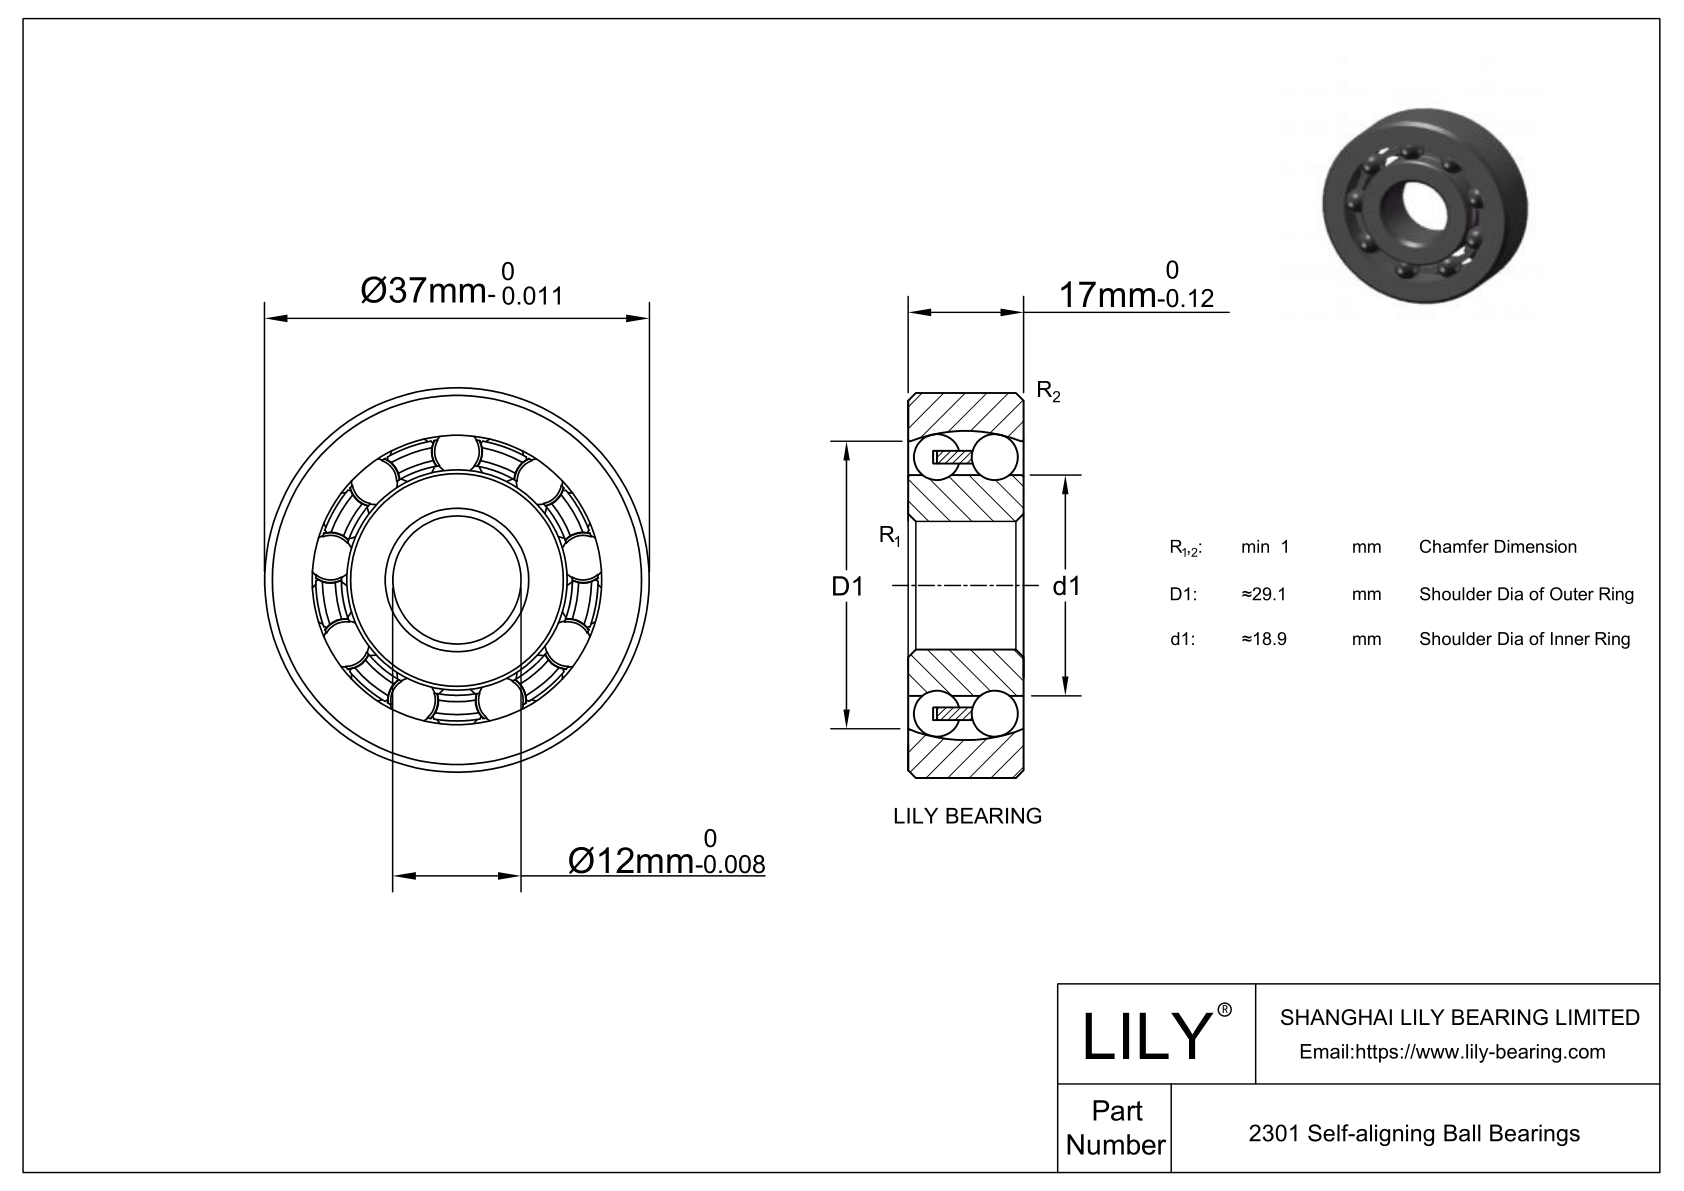 S2301 Stainless Steel Self Aligning Ball Bearings cad drawing